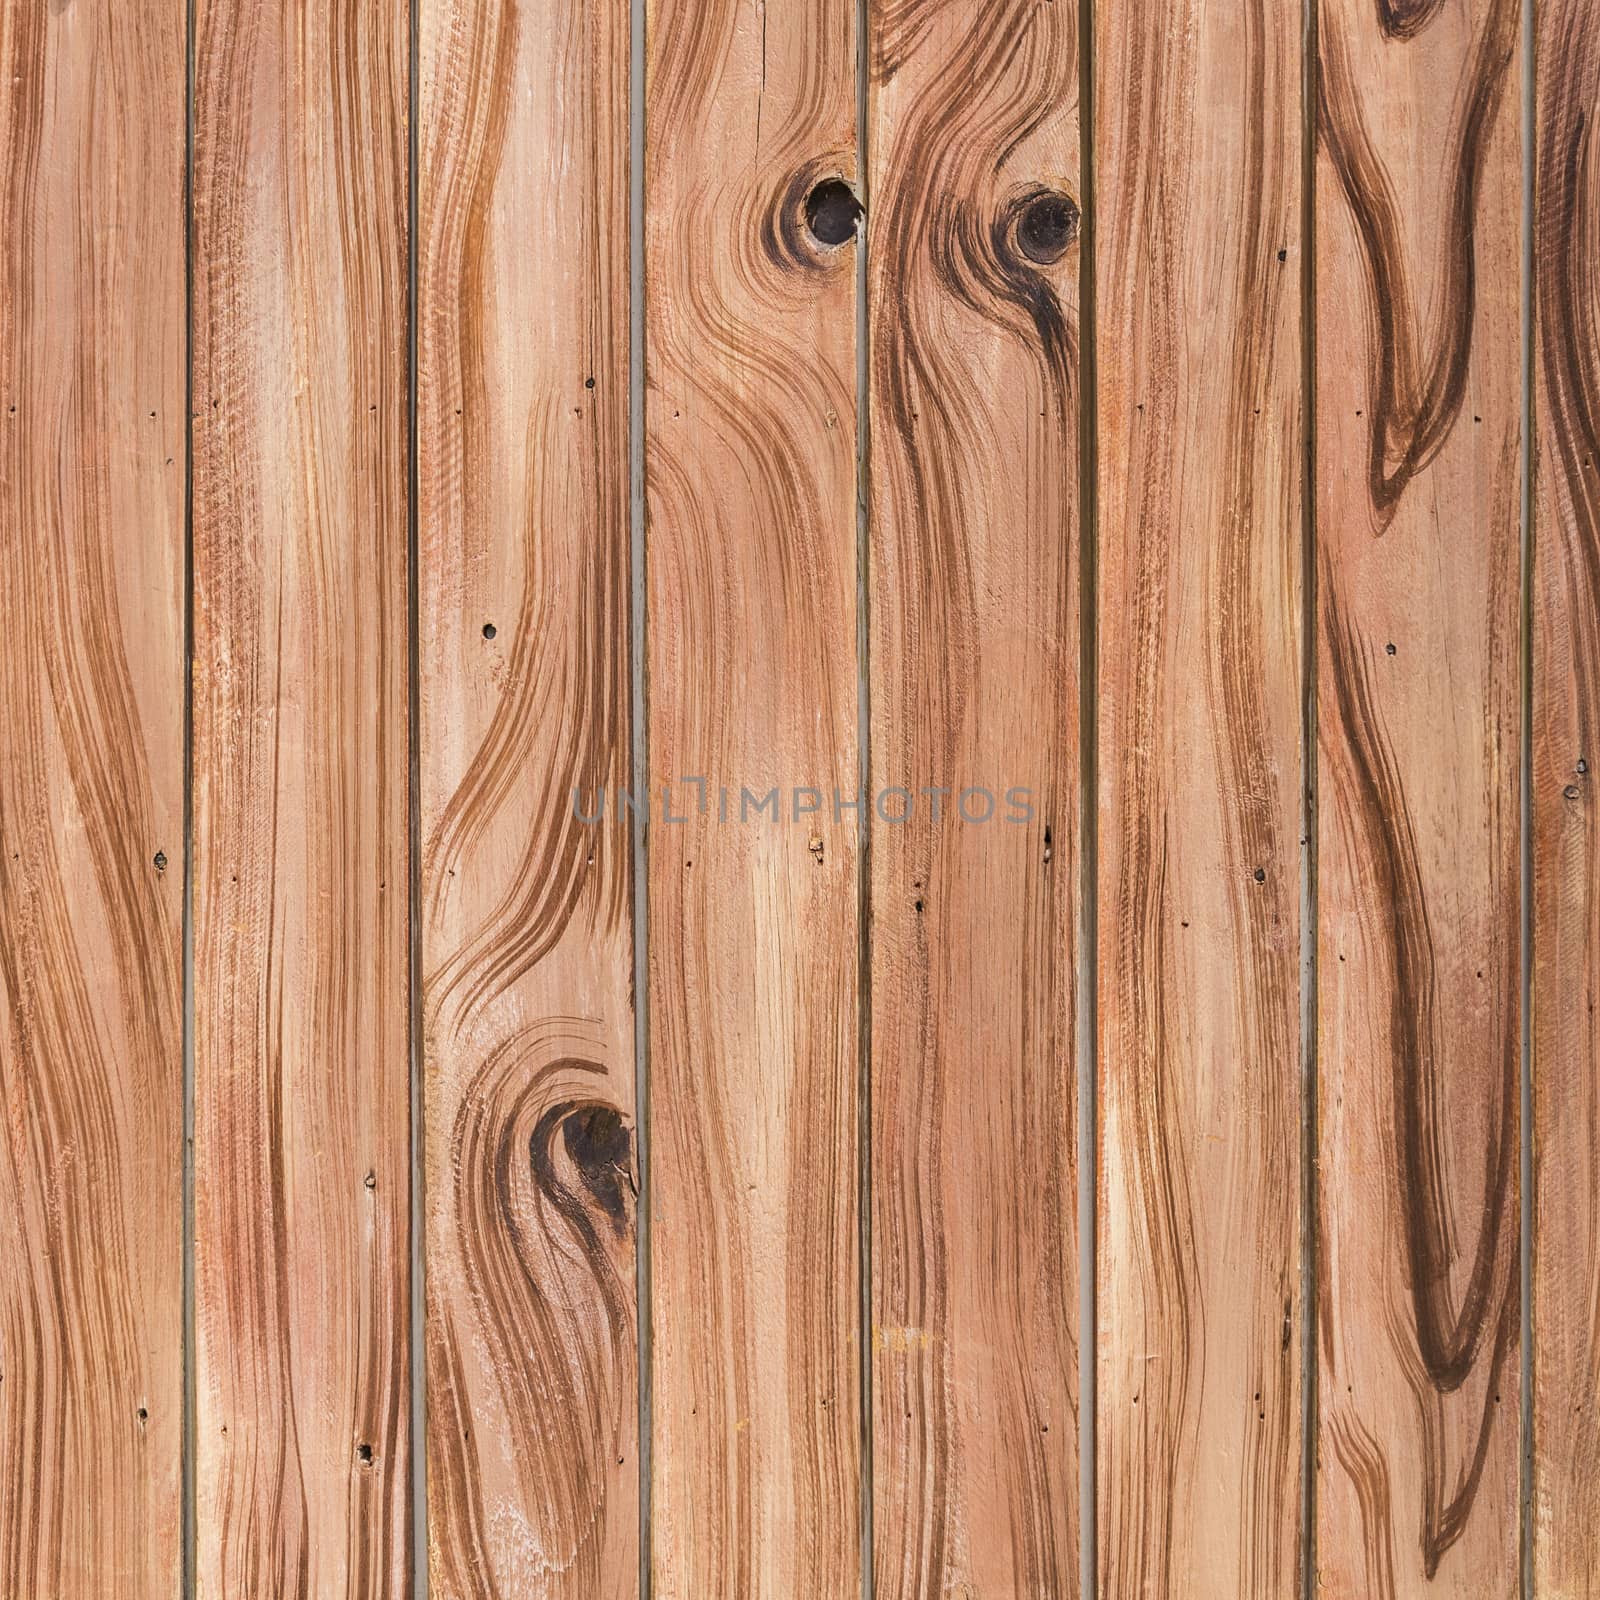 Brown wood plank texture and background